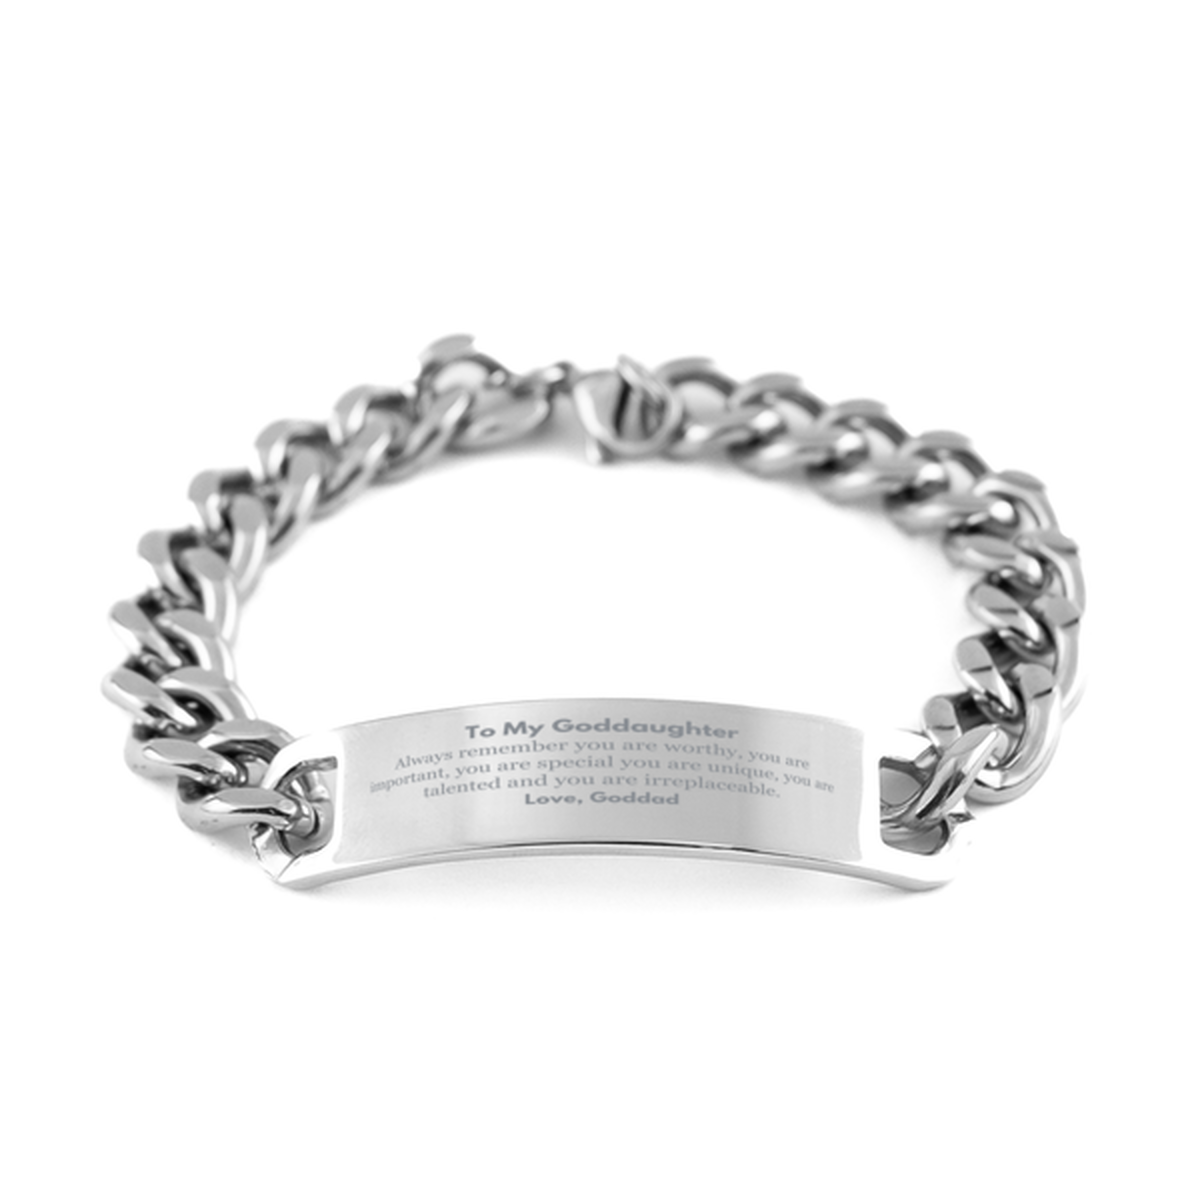 Goddaughter Birthday Gifts from Goddad, Inspirational Cuban Chain Stainless Steel Bracelet for Goddaughter Christmas Graduation Gifts for Goddaughter Always remember you are worthy, you are important. Love, Goddad